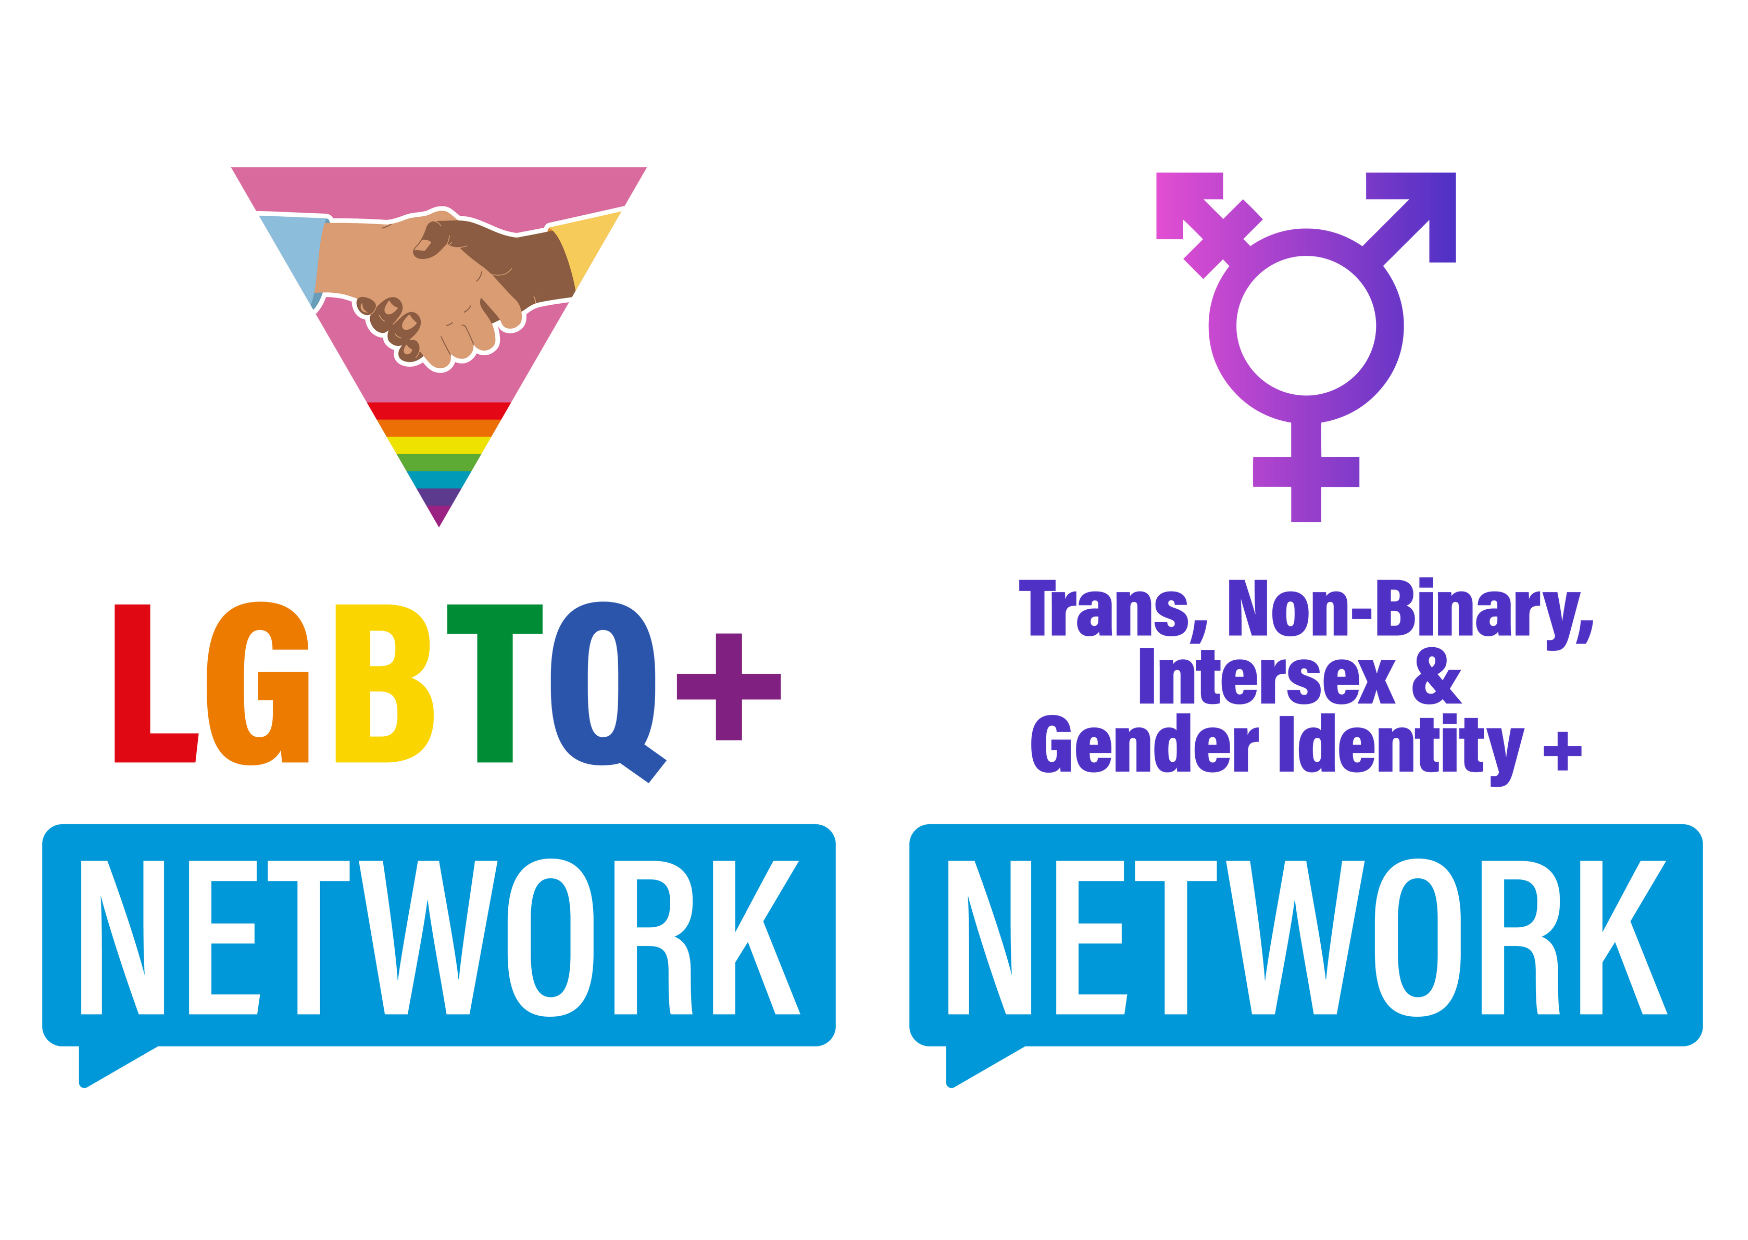 LGBTQ+ and Trans, Non-Binary, Intersex and Gender Identity + Network Logos